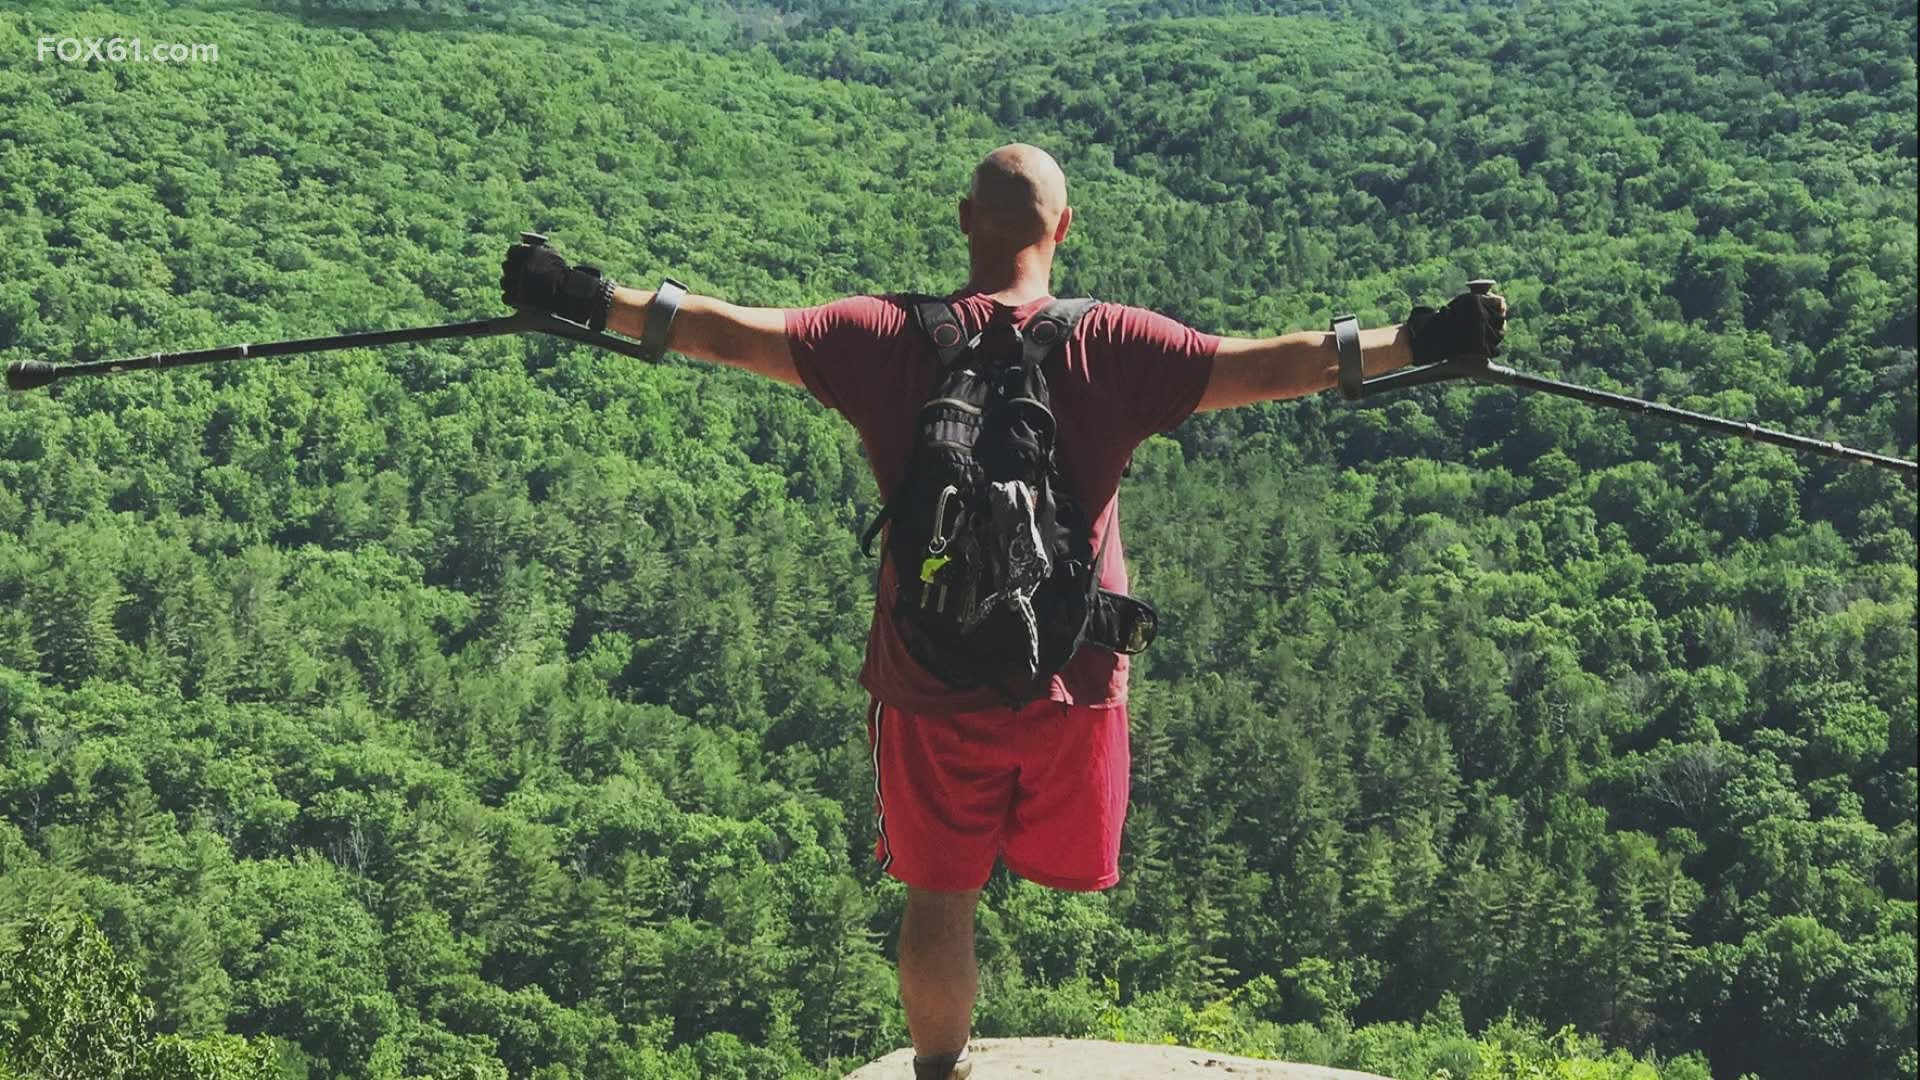 The 42-year-old father of three will do the climb in New Hampshire, which includes a peak on Mount Washington, on crutches.